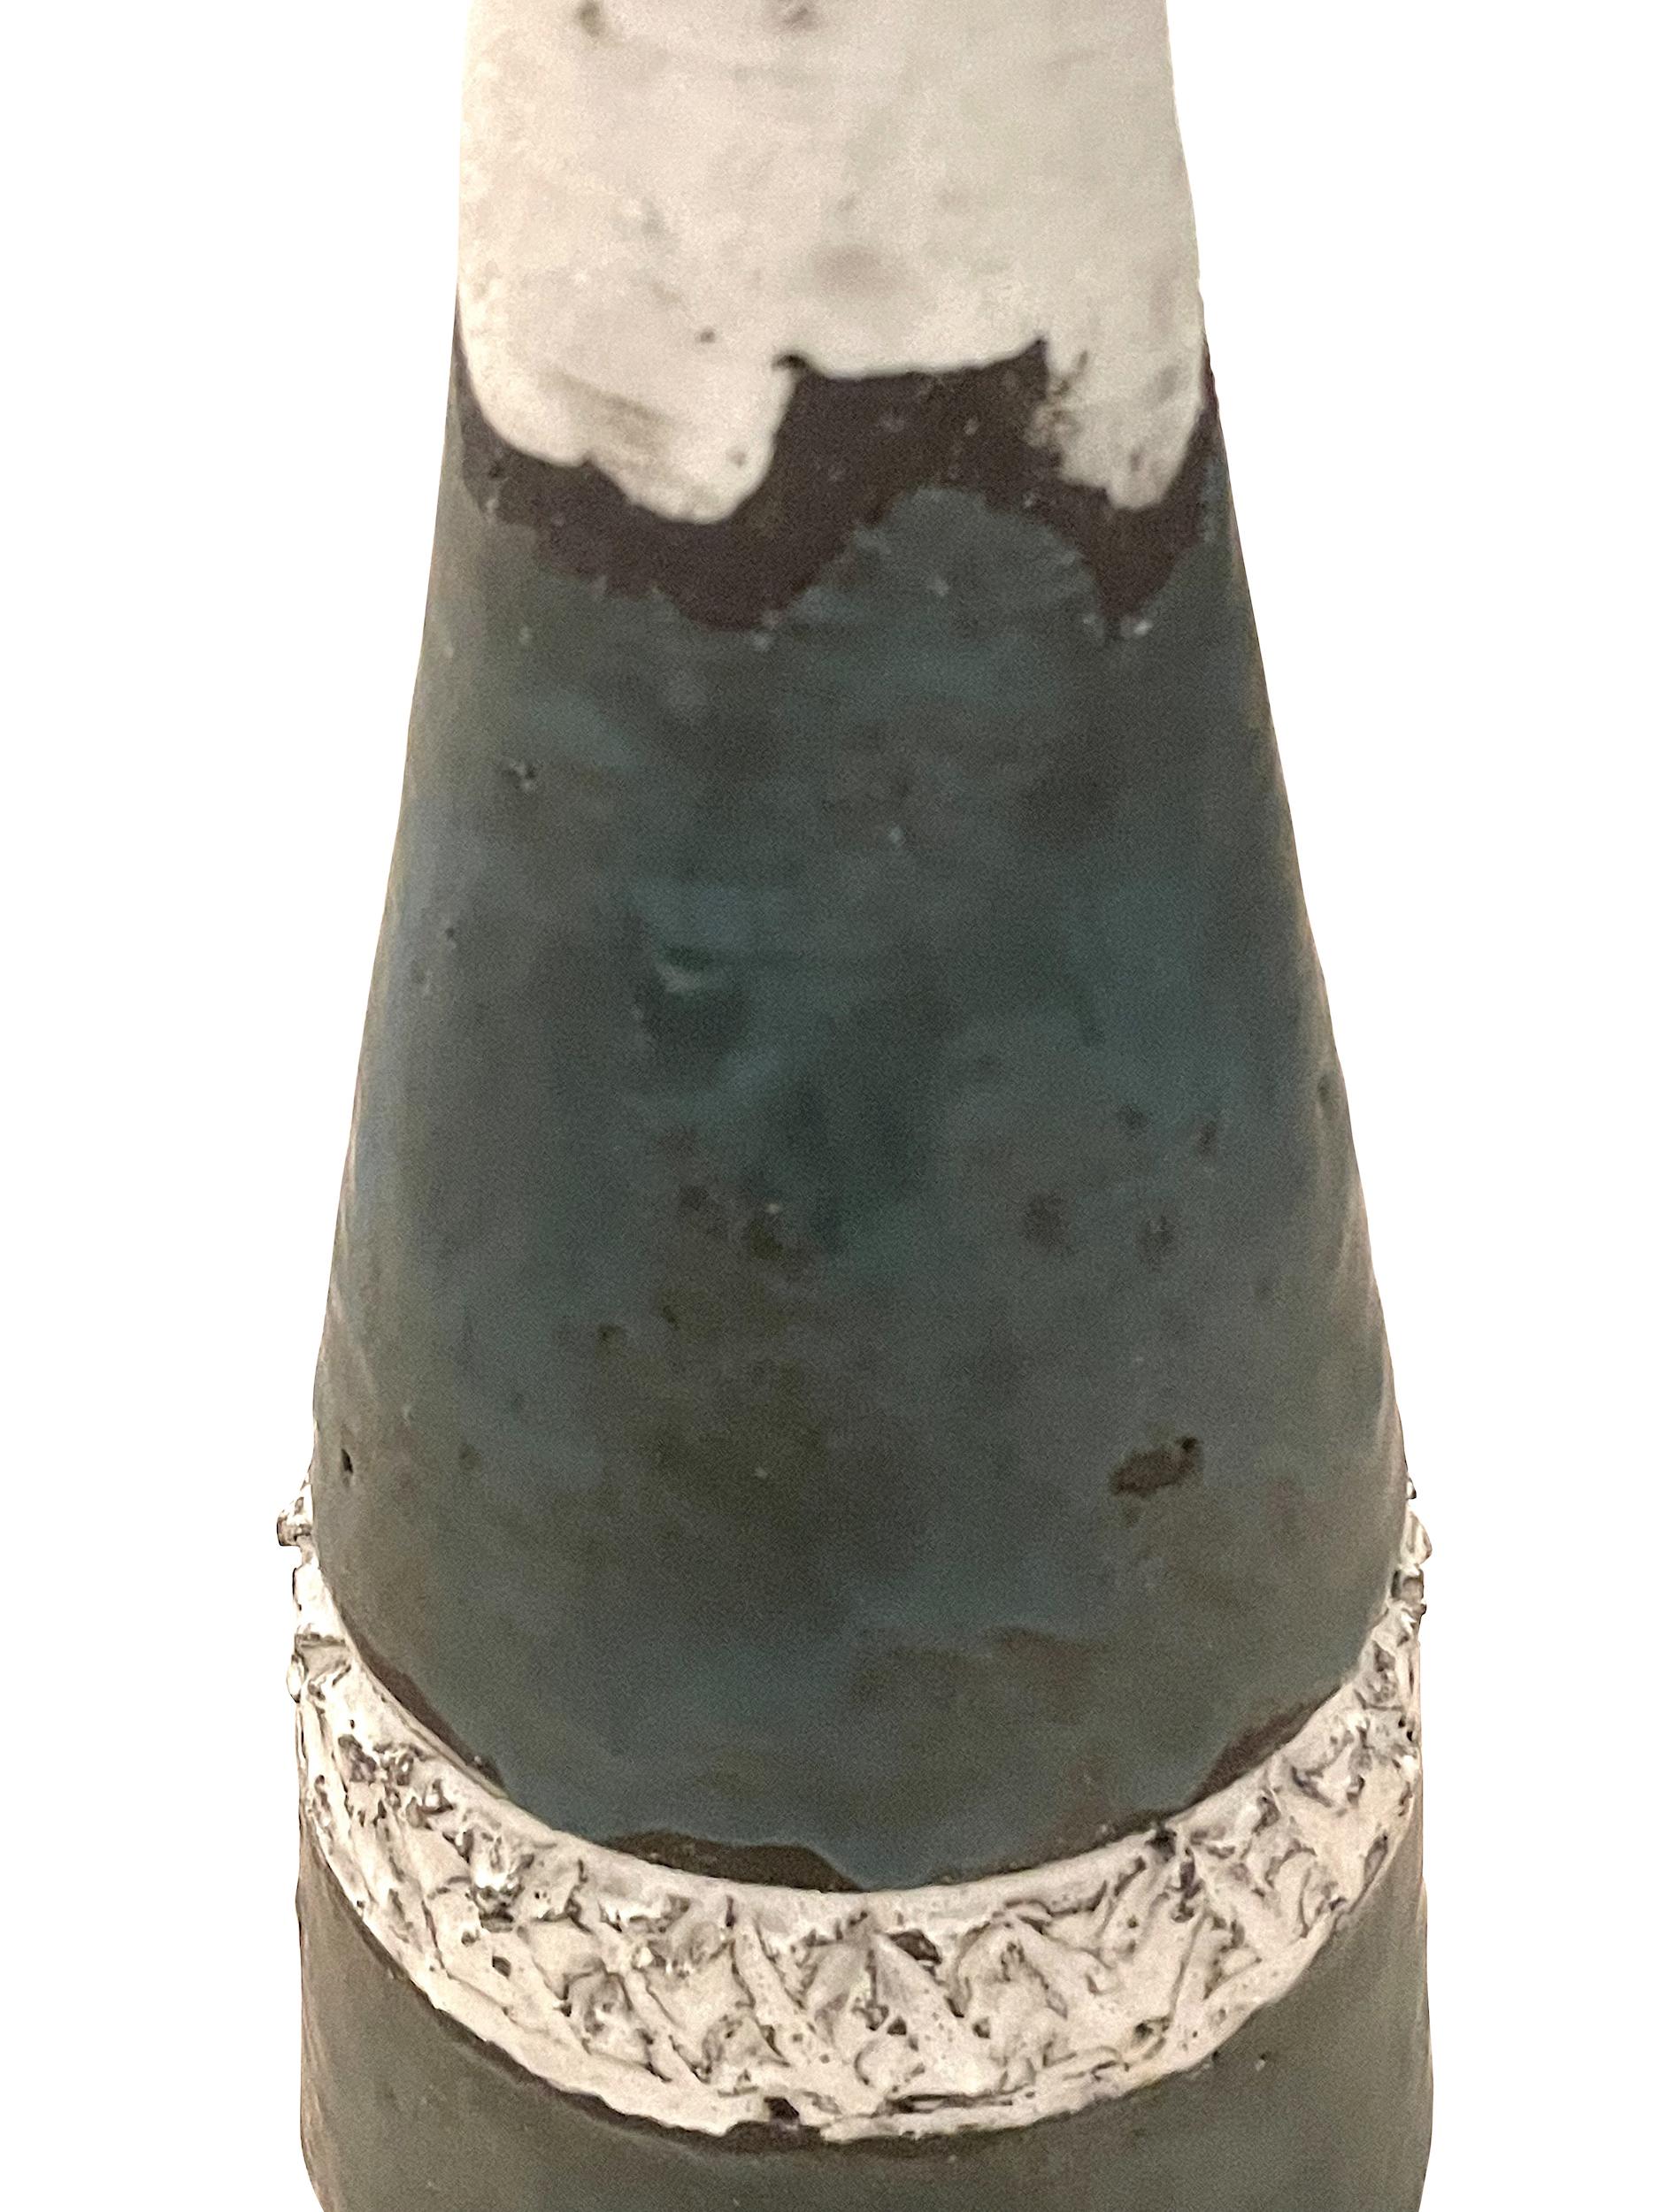 Mid Century Belgian bottle shaped vase.
Thin mouth opening.
Textured white surface with bands of top and bottom in teal.
